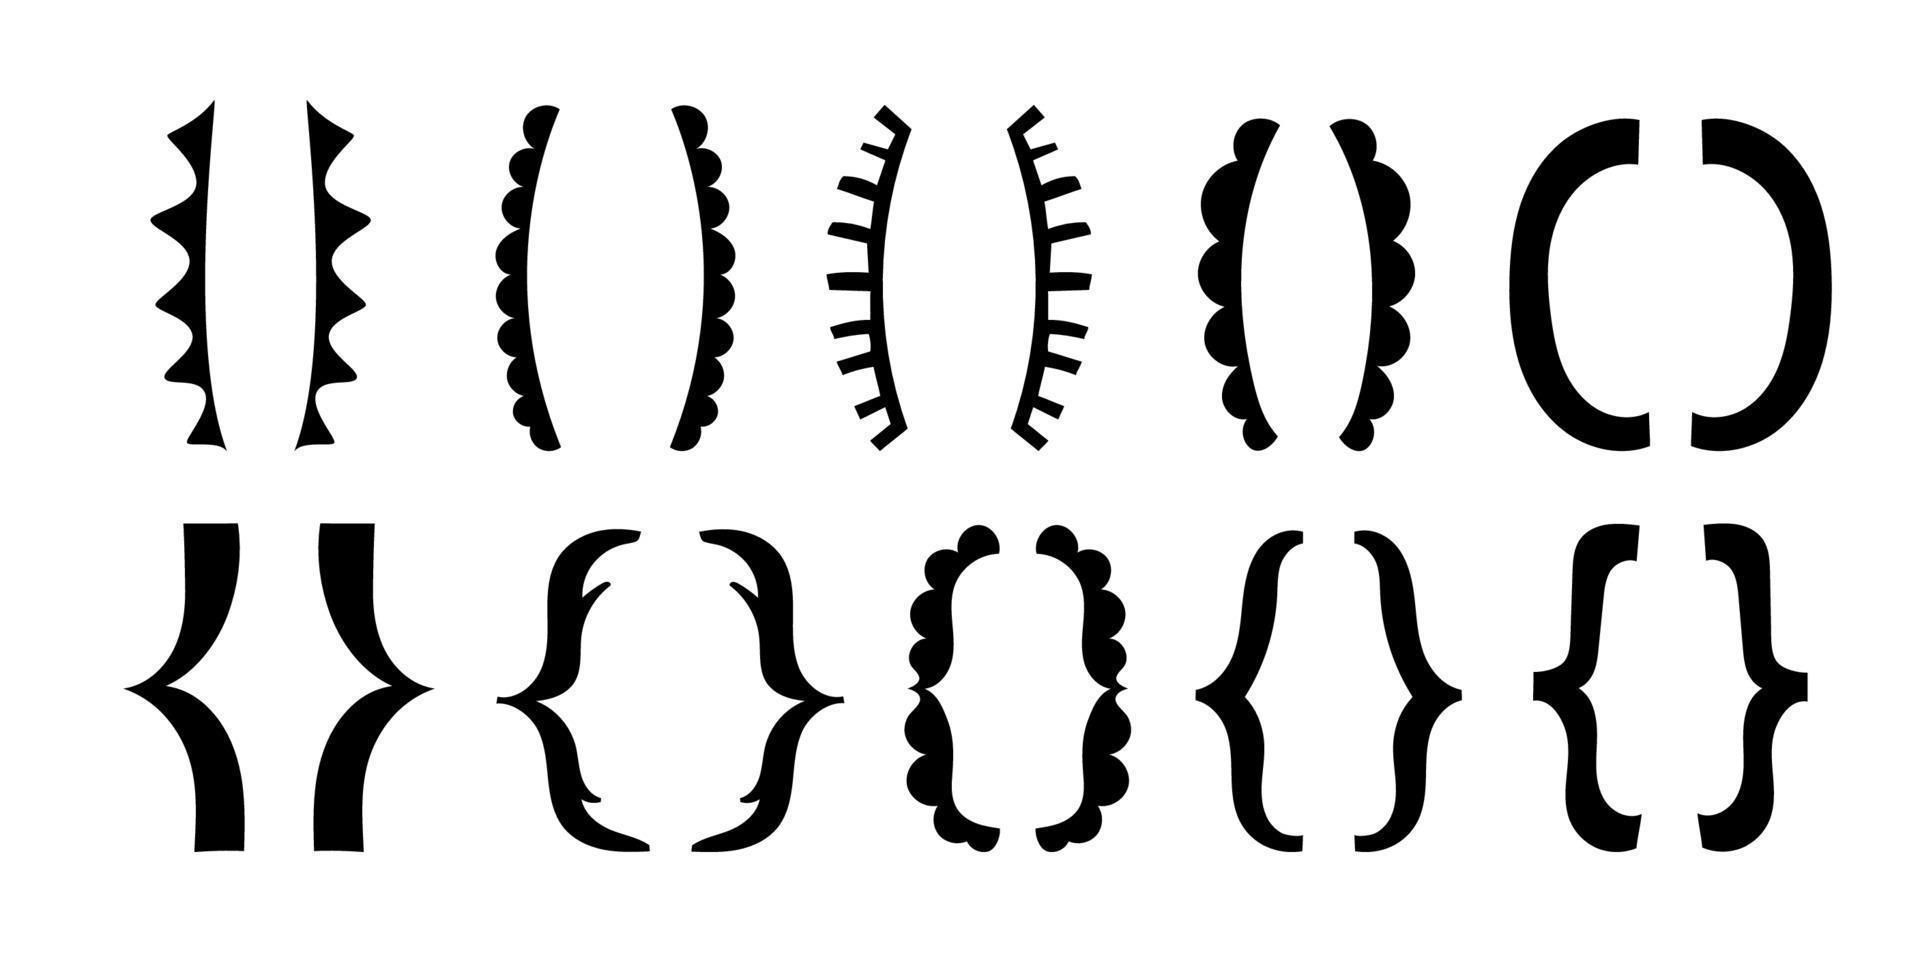 Silhouette of brackets. A set of various hand-drawn text frames. Curly text symbols isolated. Vector illustration of collection of punctuation marks.